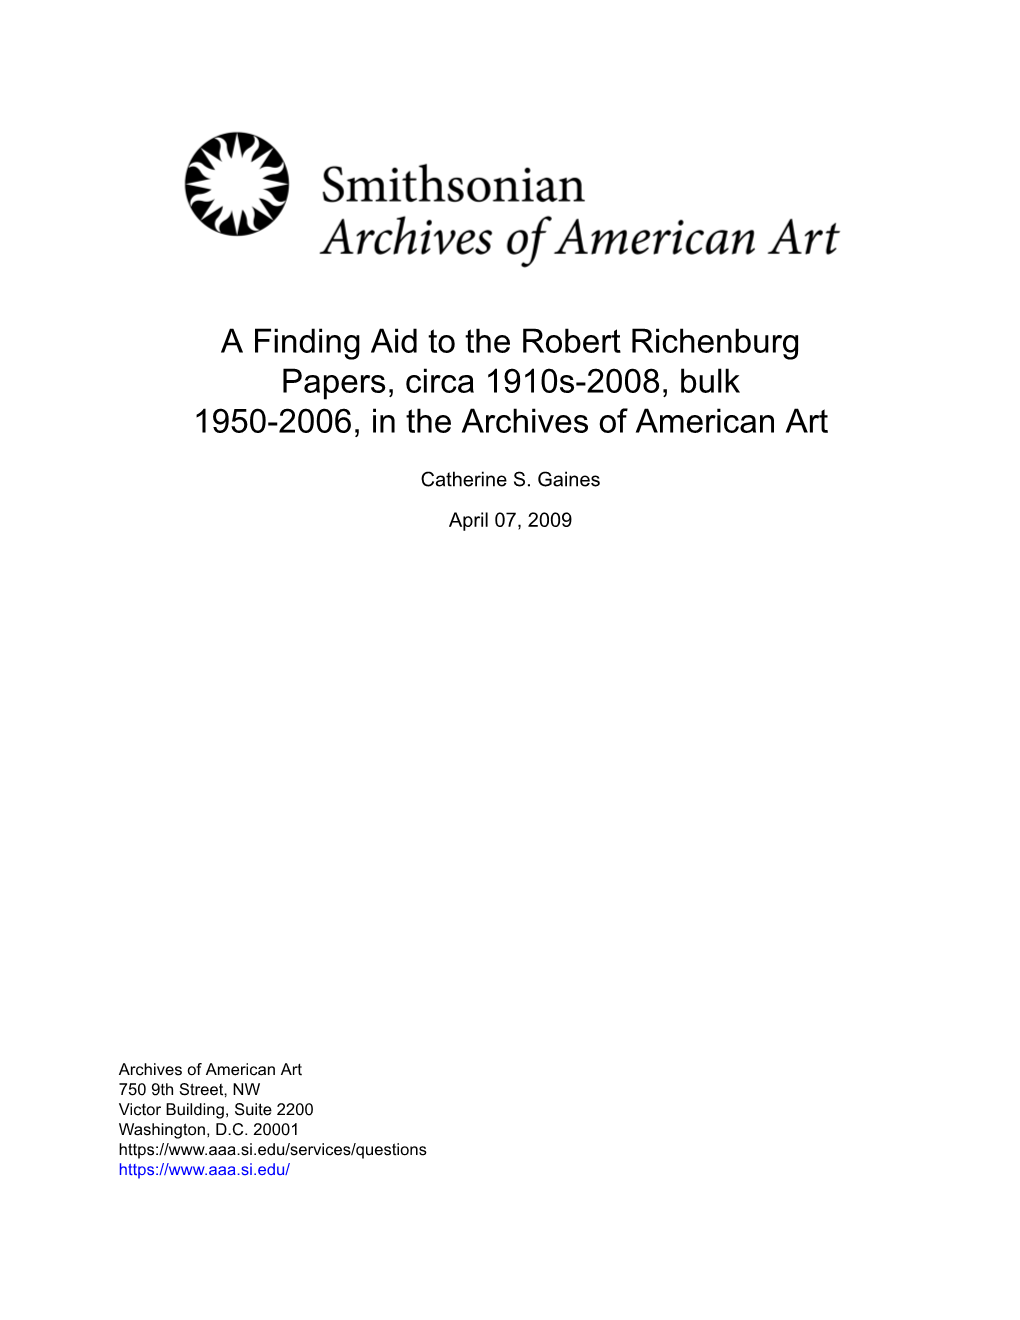 A Finding Aid to the Robert Richenburg Papers, Circa 1910S-2008, Bulk 1950-2006, in the Archives of American Art